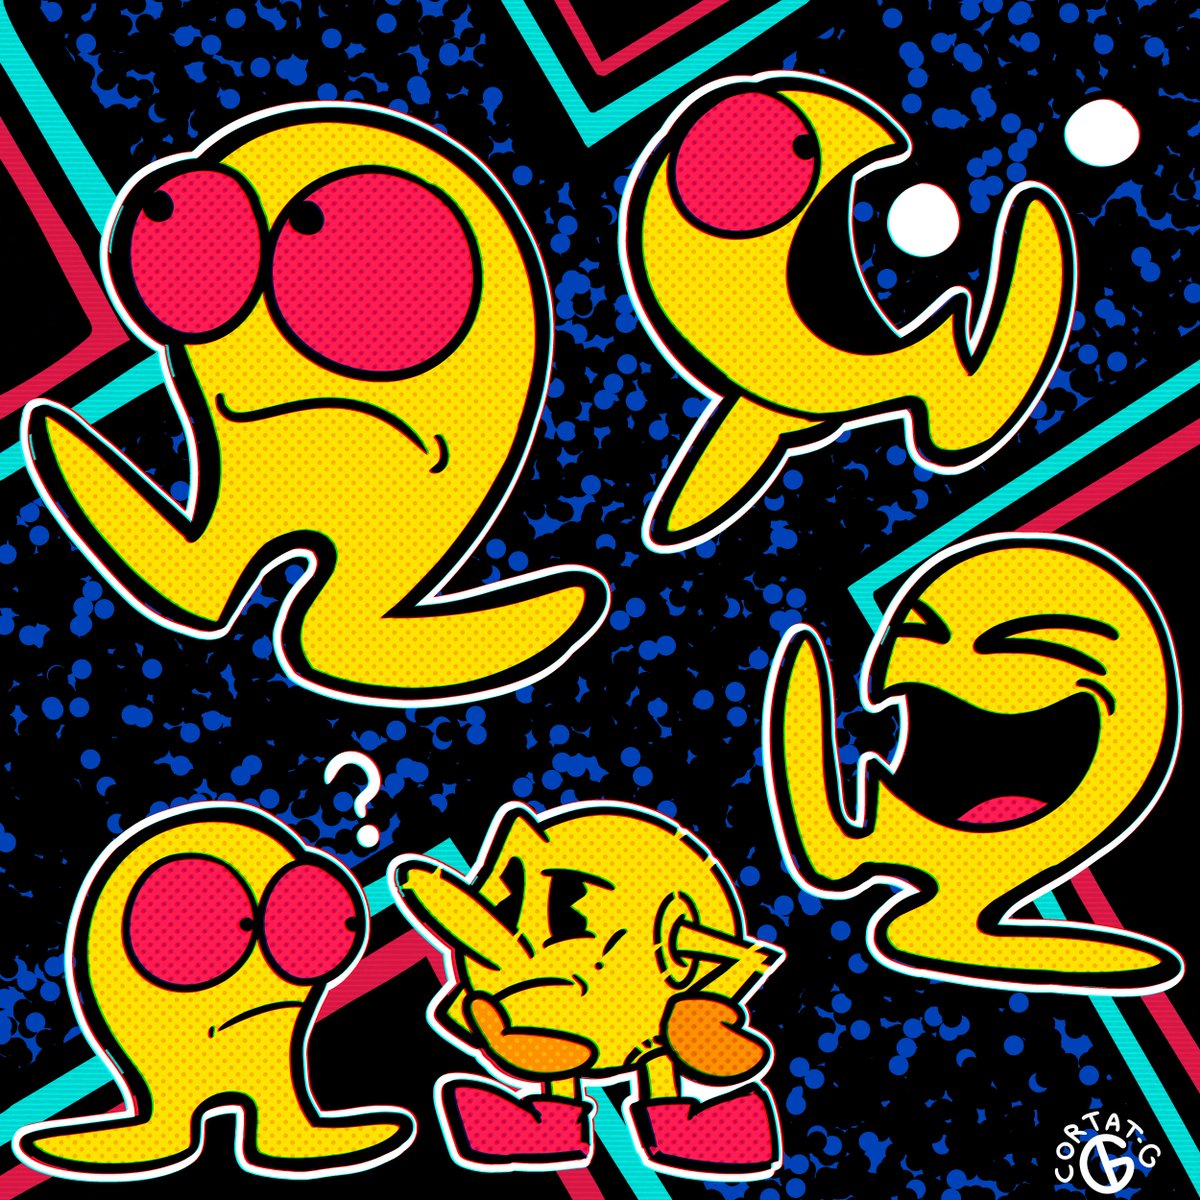 Always loved the goofy design Midway gave Pac-Man when he came stateside. 